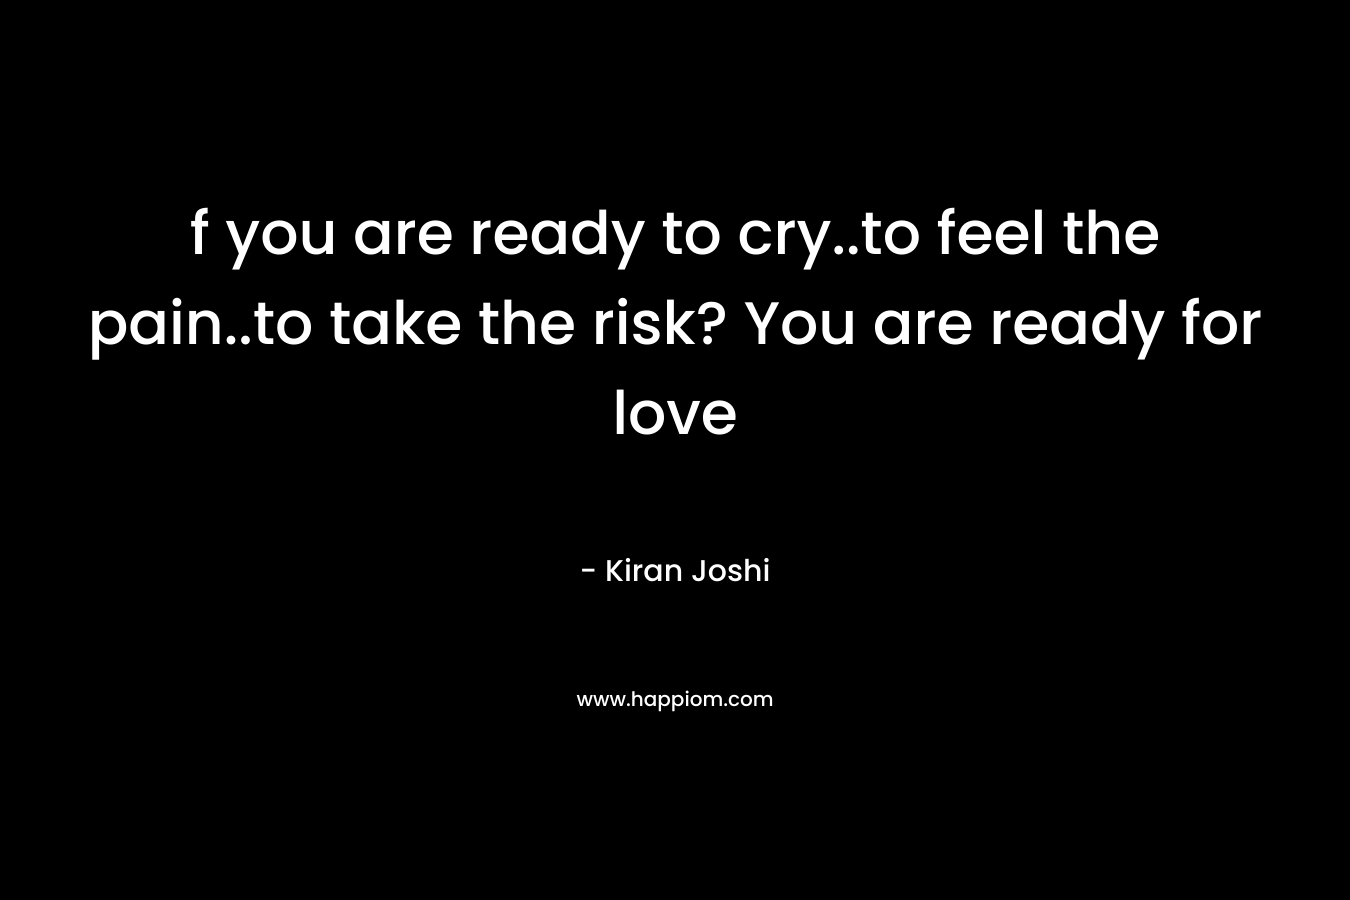 f you are ready to cry..to feel the pain..to take the risk? You are ready for love